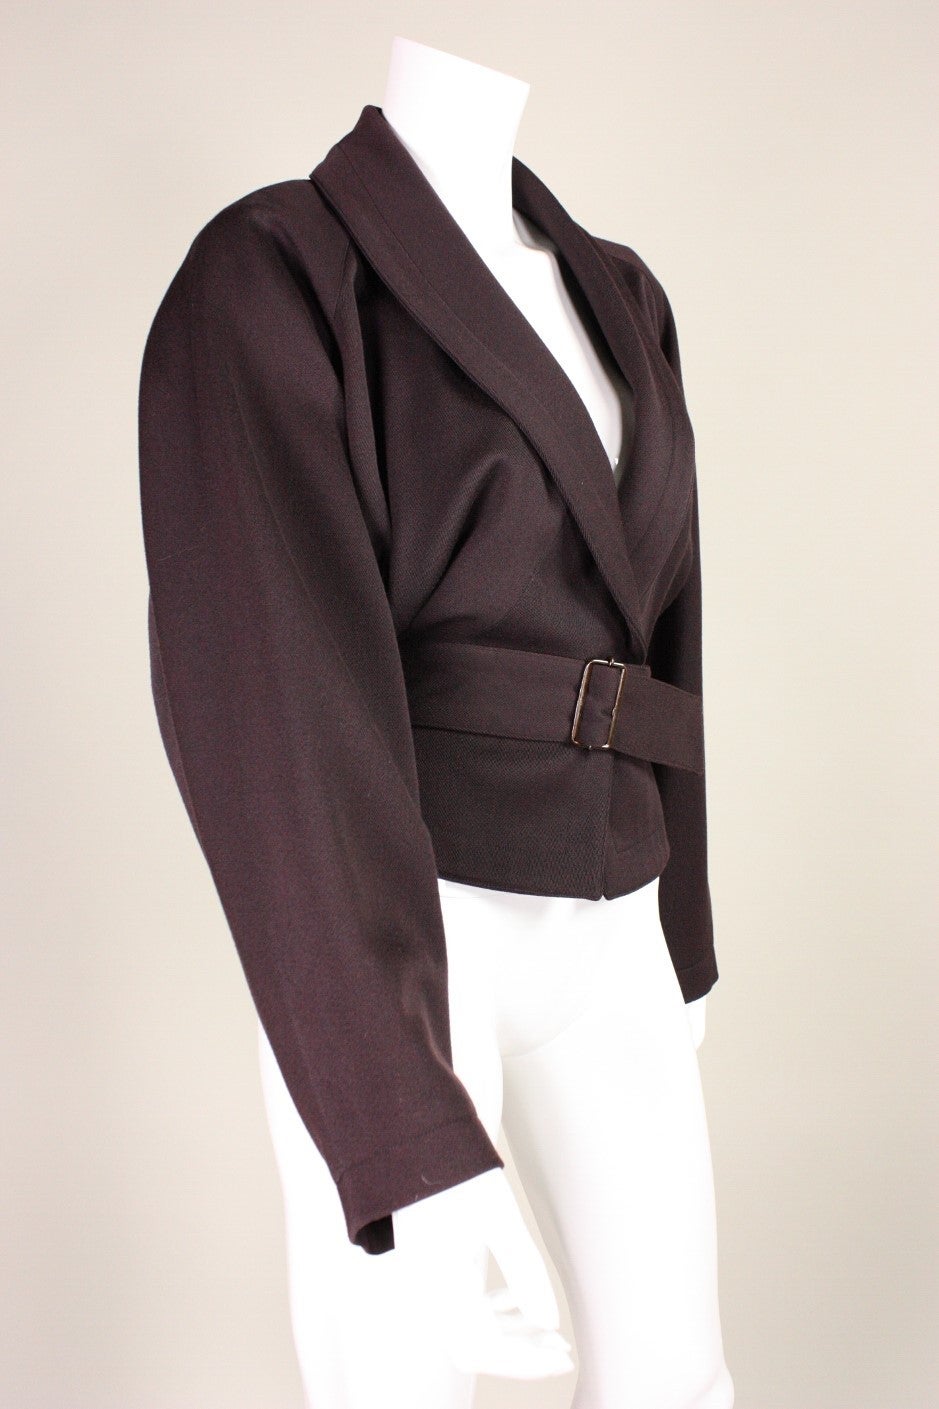 Vintage jacket was designed by Azzedine Alaia and retailed at Bergdorf Goodman.  It is made of chocolate brown wool and features a wrap around belt.  Single snap closure at center front waist.  Great pleated detailing at side waist.  Fully